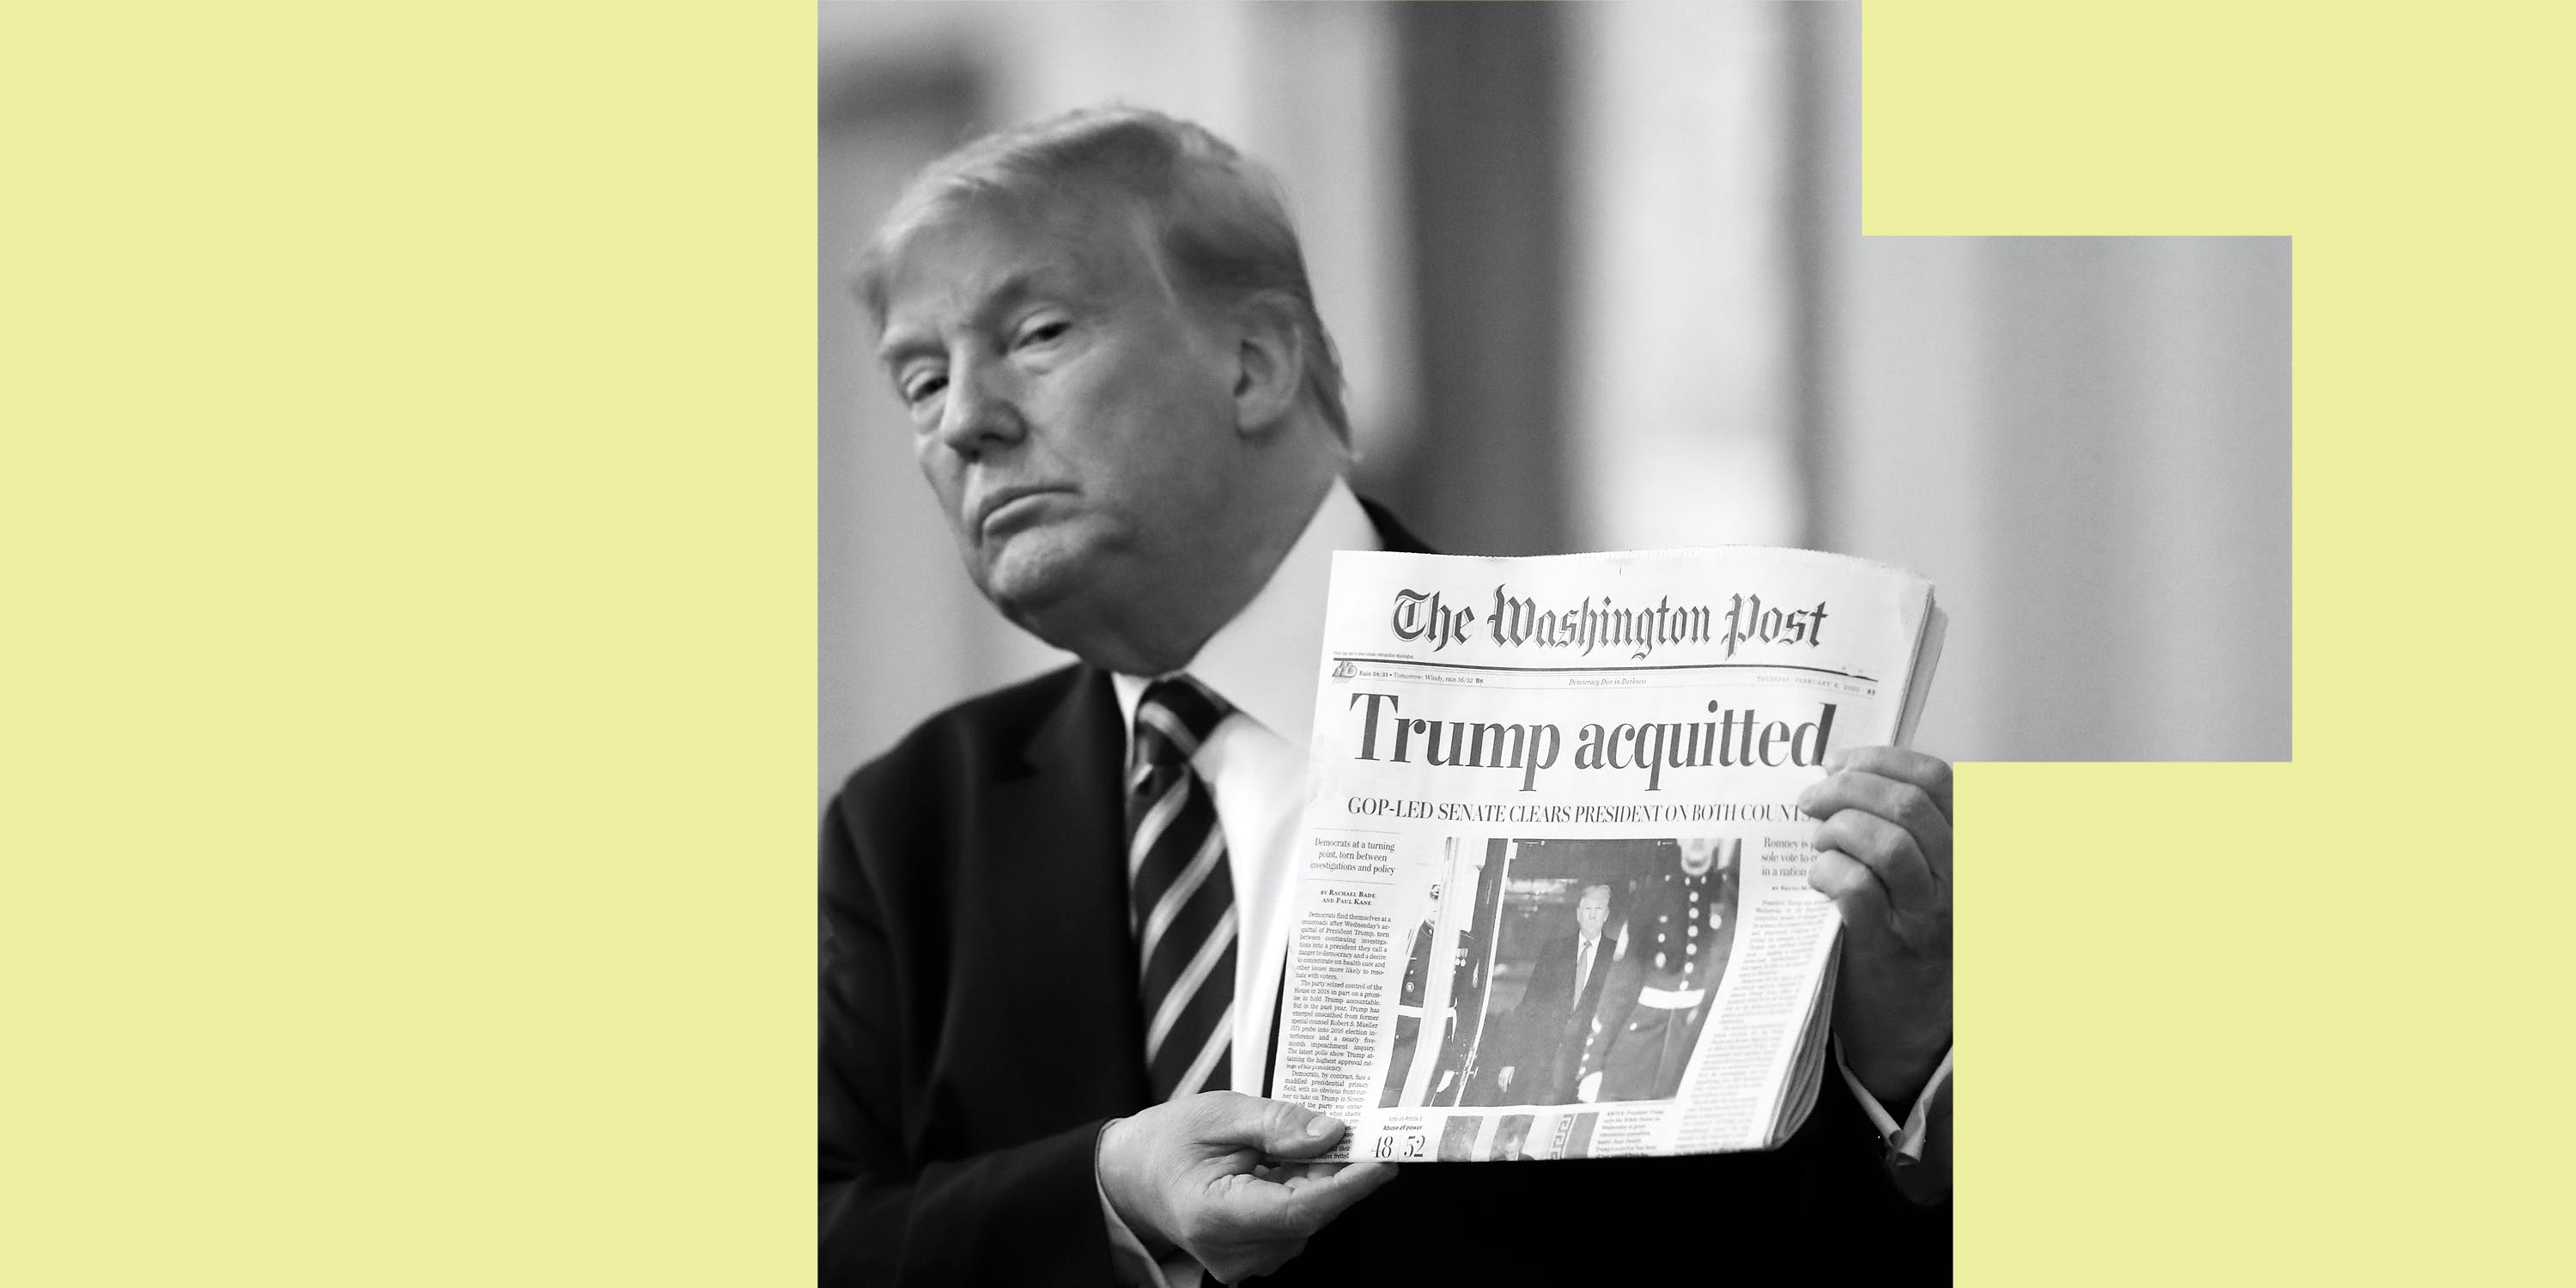 U.S. President Donald Trump holds up a copy of the Washington Post newspaper during an event at the White House in Washington, D.C., Thursday, Feb. 6, 2020.